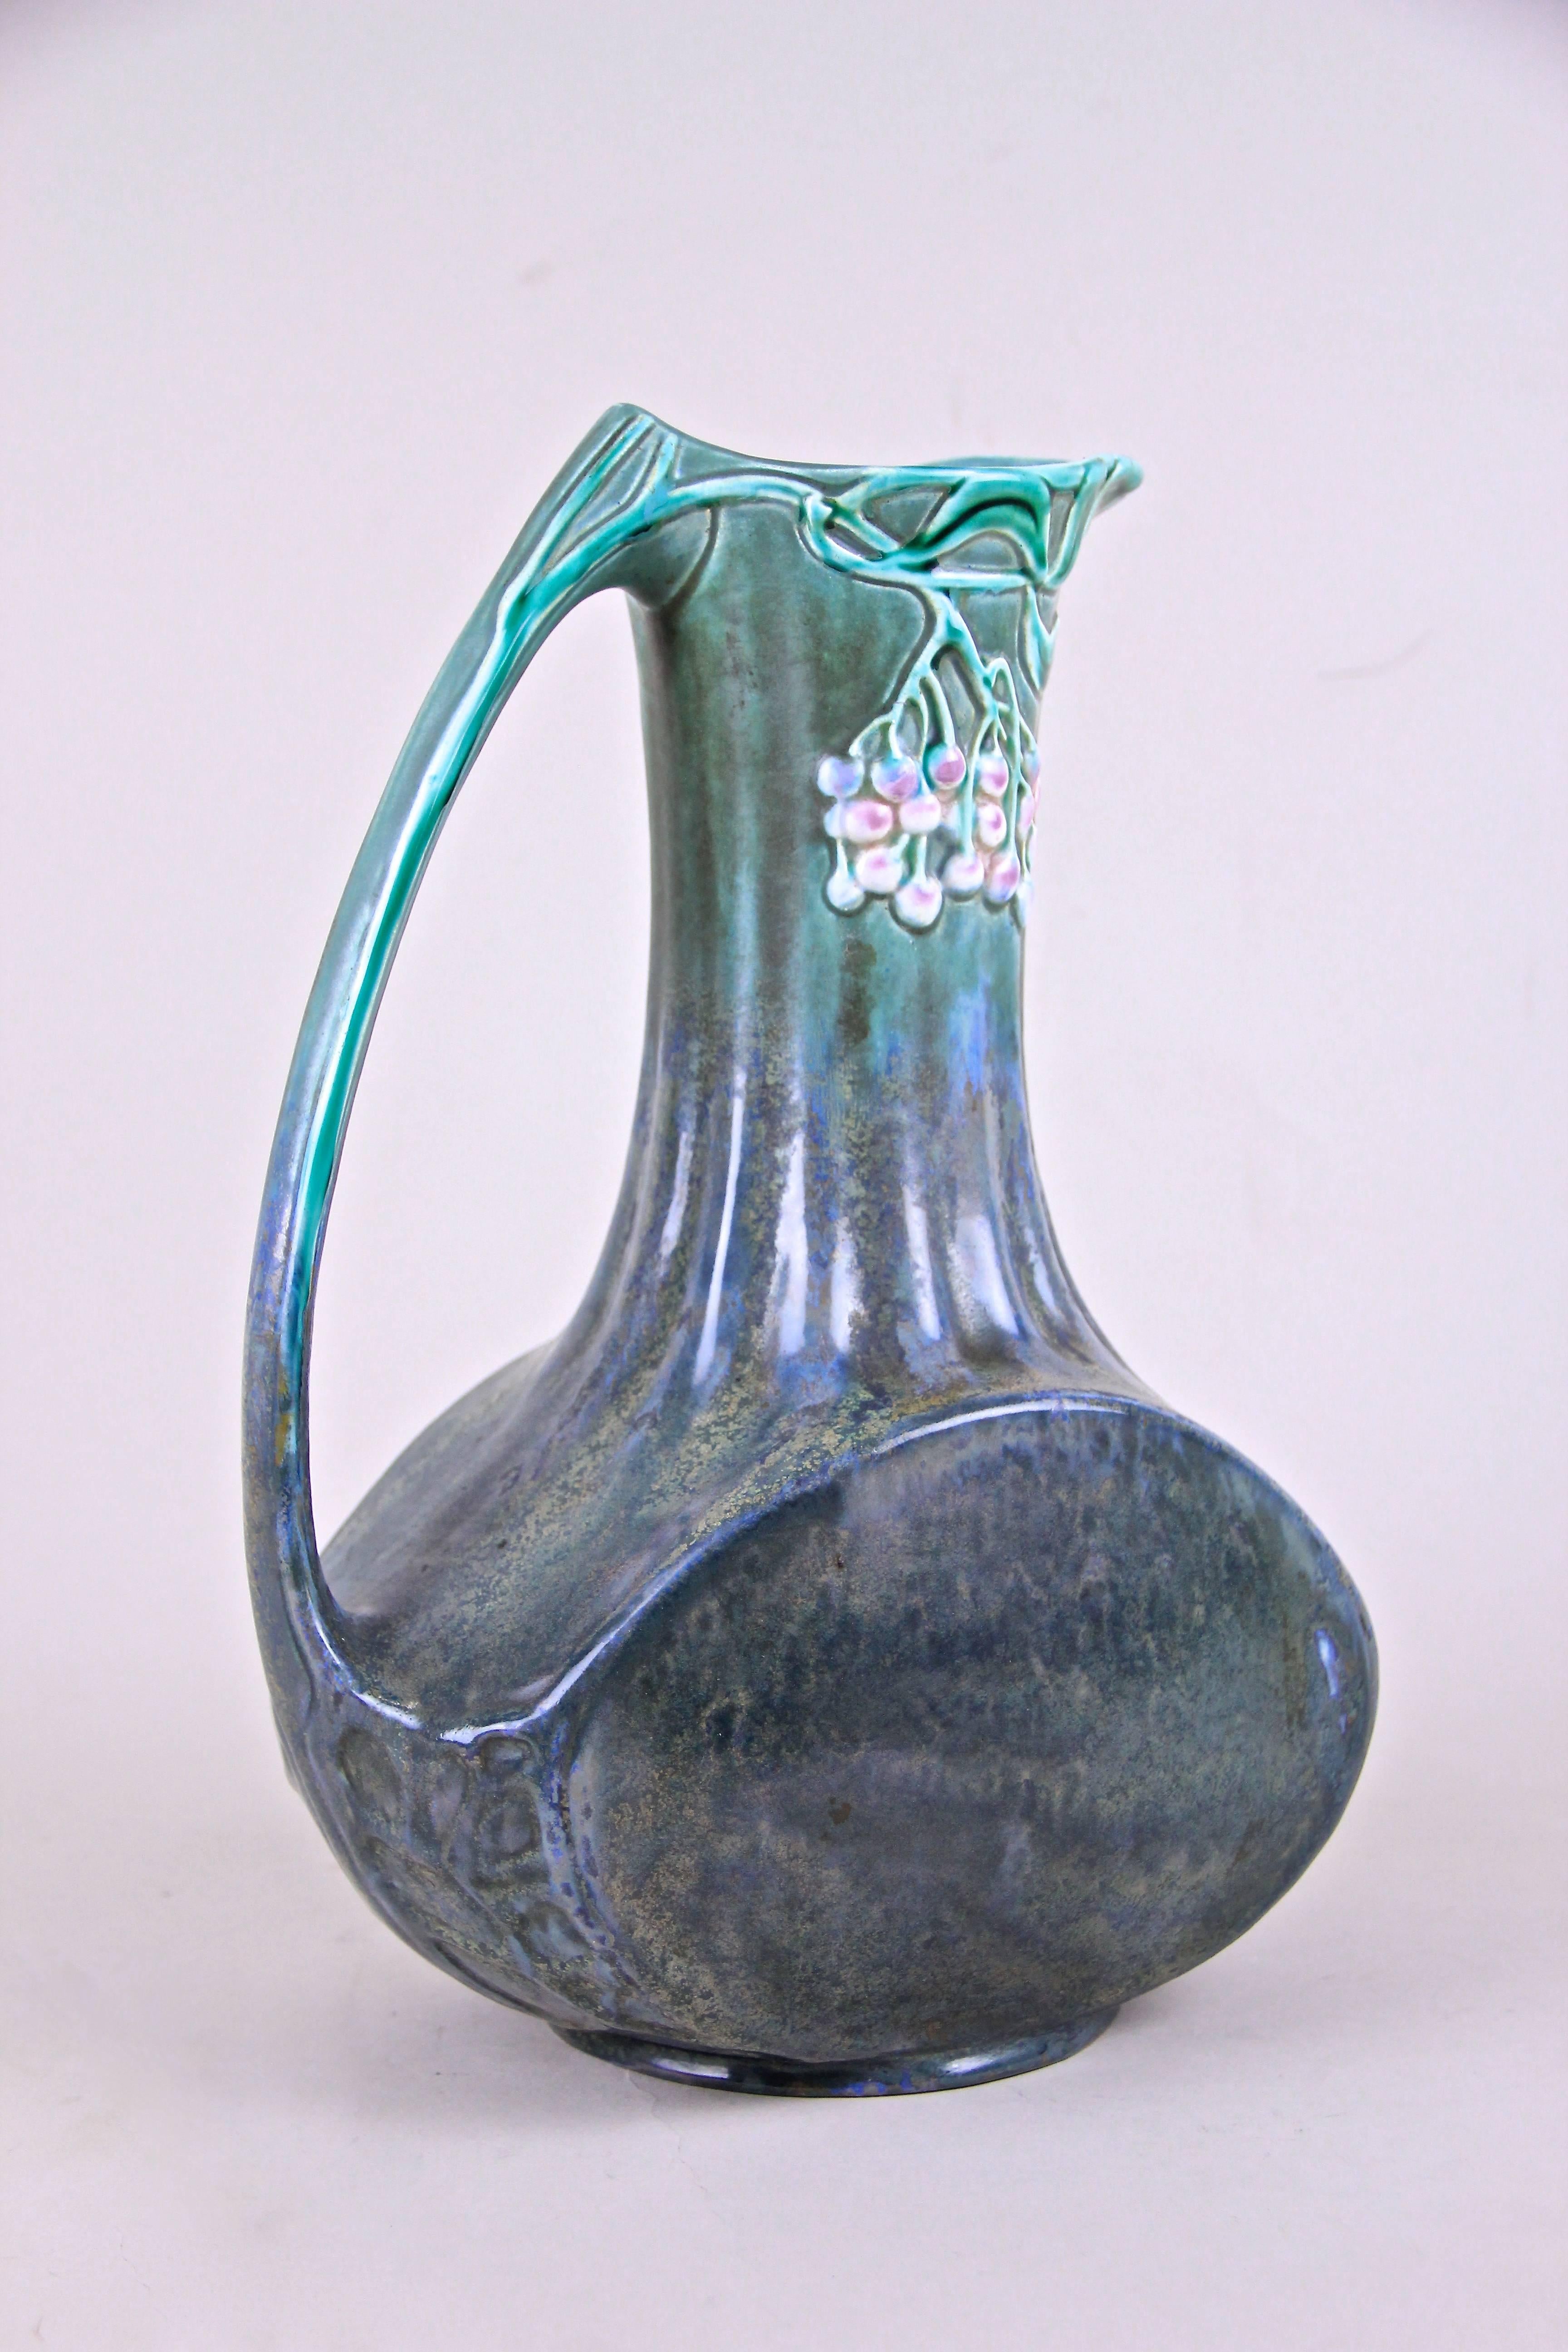 We are presenting you this marvelous Majolica Art Nouveau pitcher made by the famous 